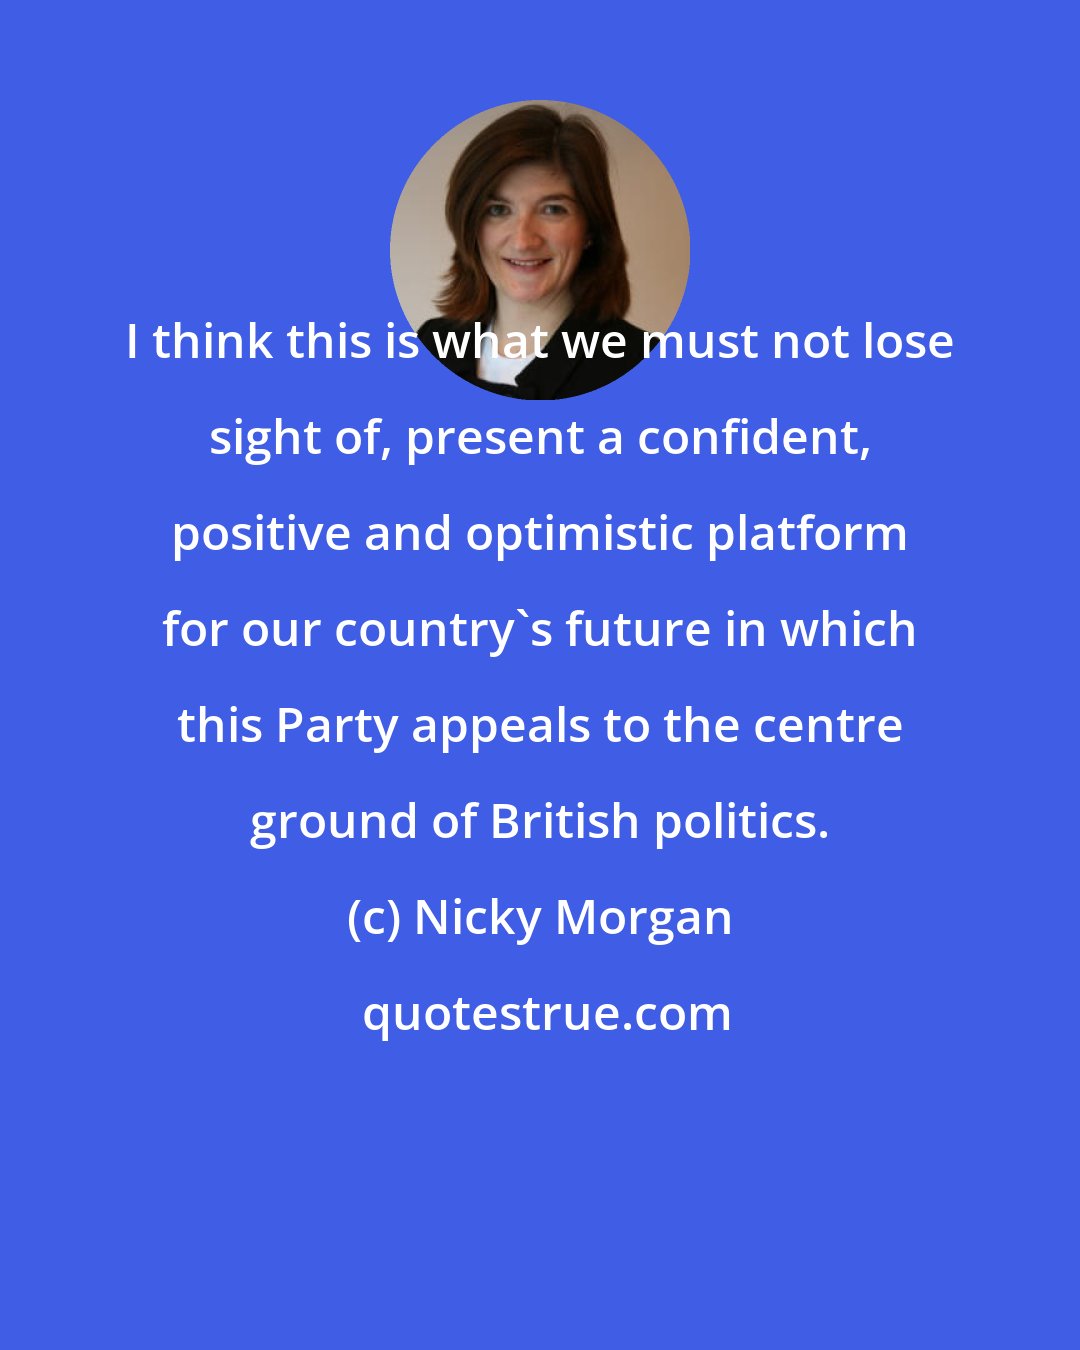 Nicky Morgan: I think this is what we must not lose sight of, present a confident, positive and optimistic platform for our country's future in which this Party appeals to the centre ground of British politics.